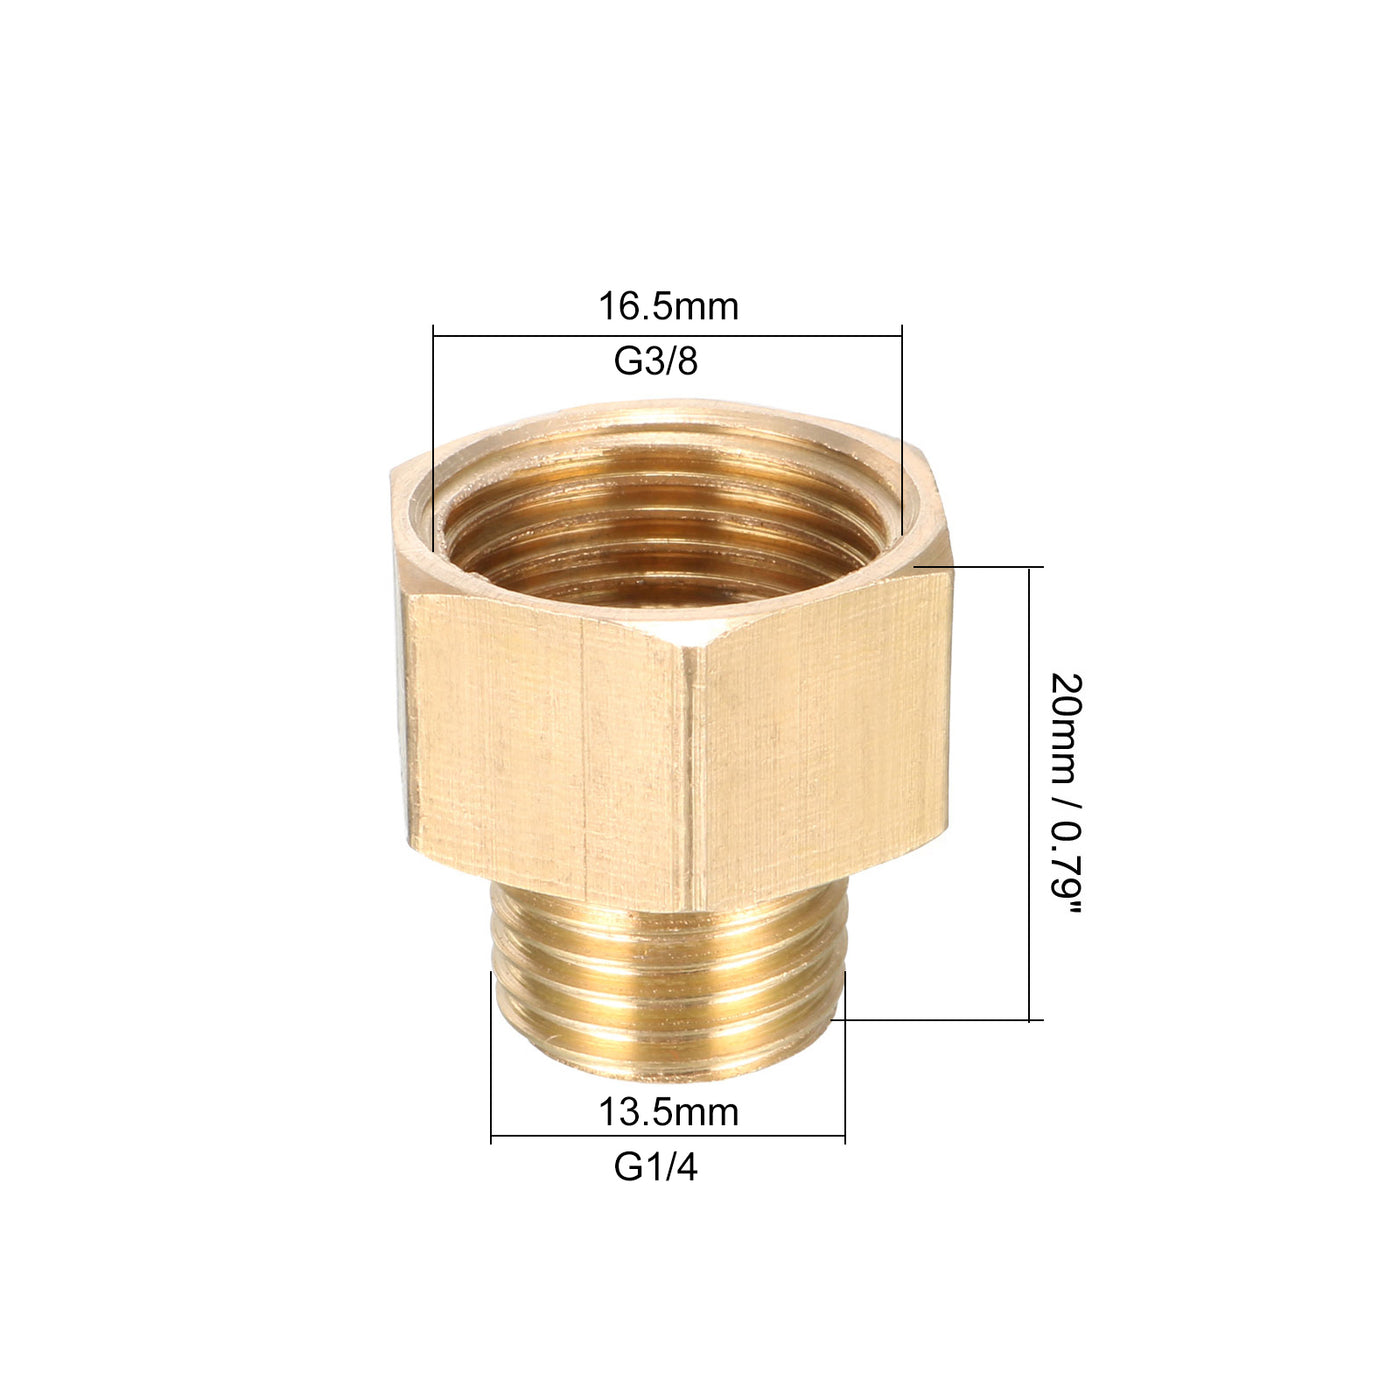 uxcell Uxcell Brass Threaded Pipe Fitting G1/4 Male x G3/8 Female Coupling 3pcs